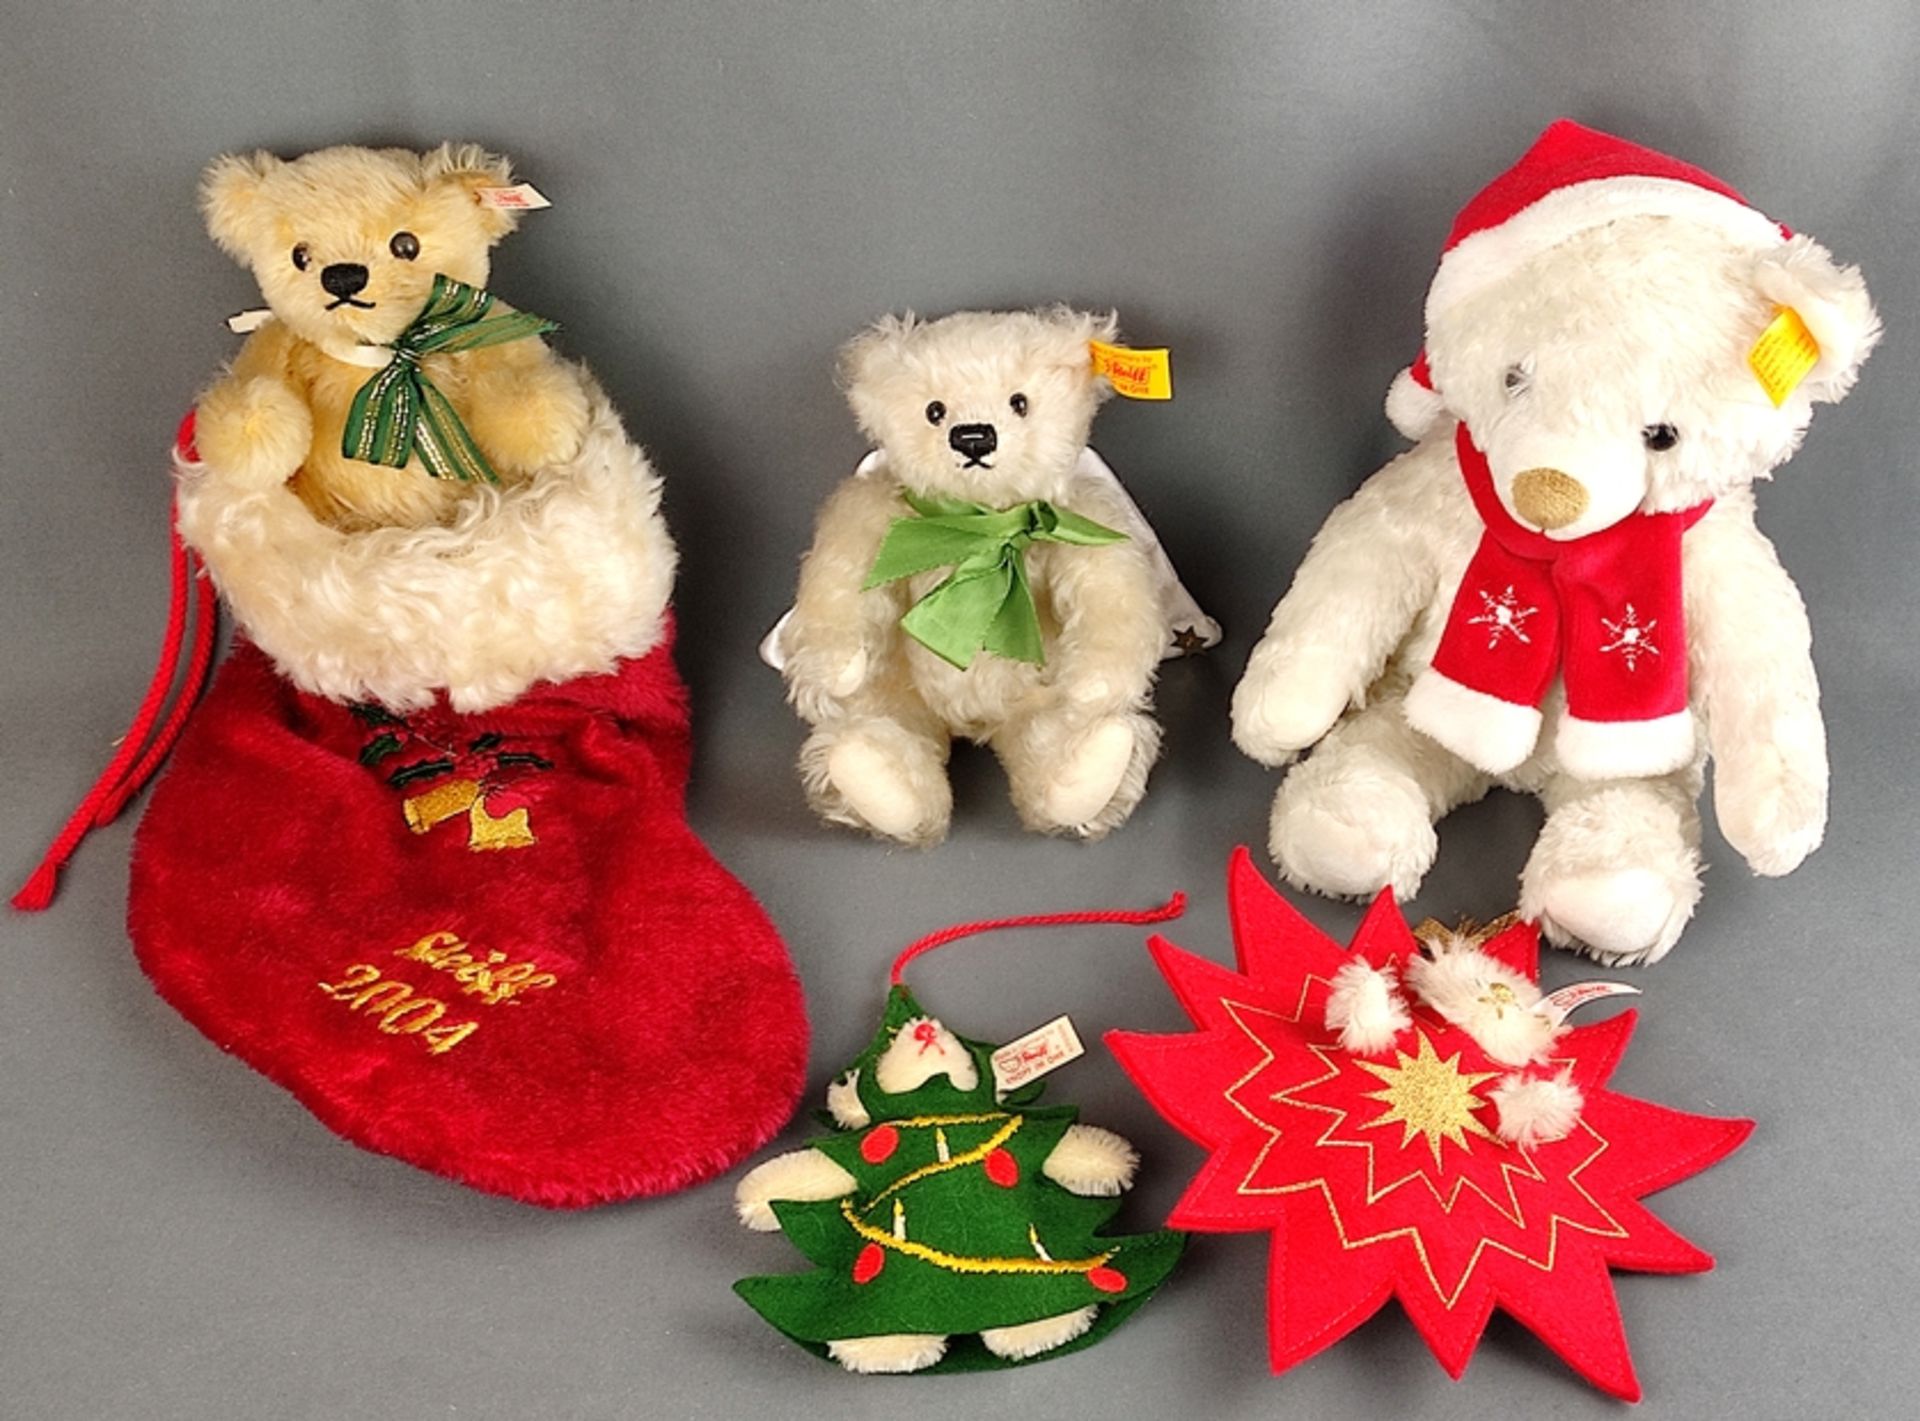 Steiff convolute "Christmas", 5 pieces, Teddy bear with Christmas stocking, limited edition of 5000